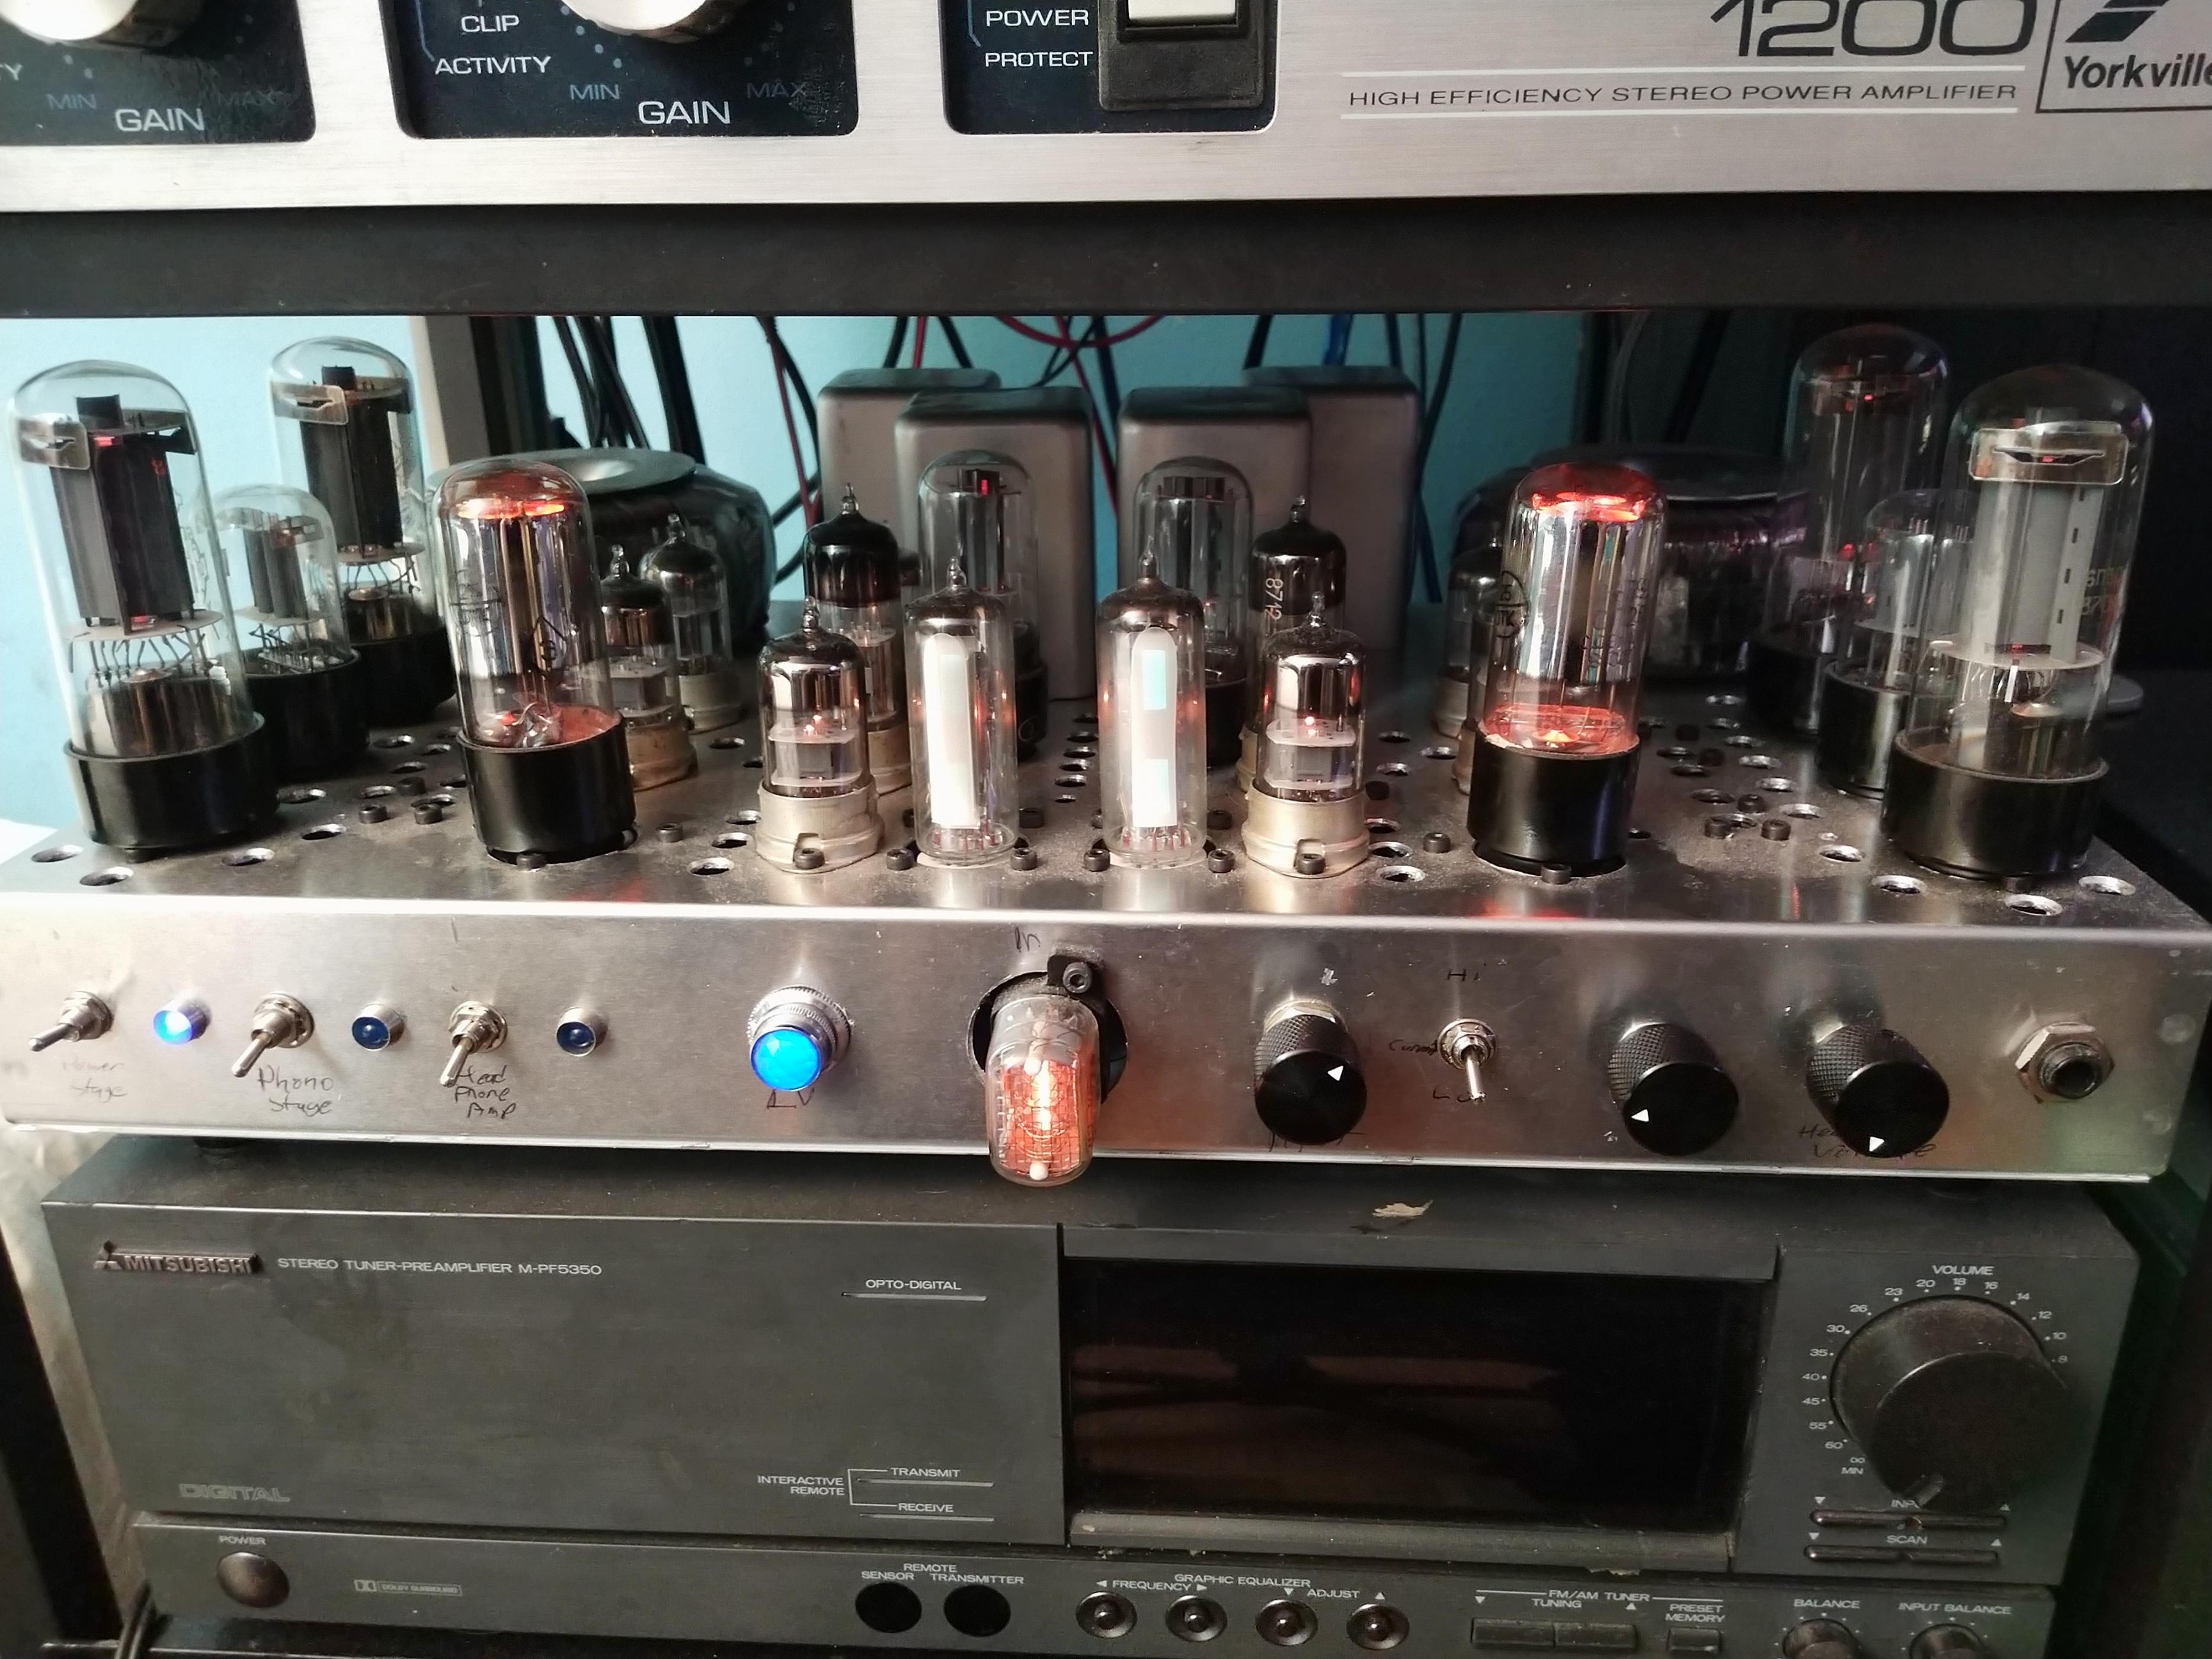 Kanged switching power supply for a tube amp.